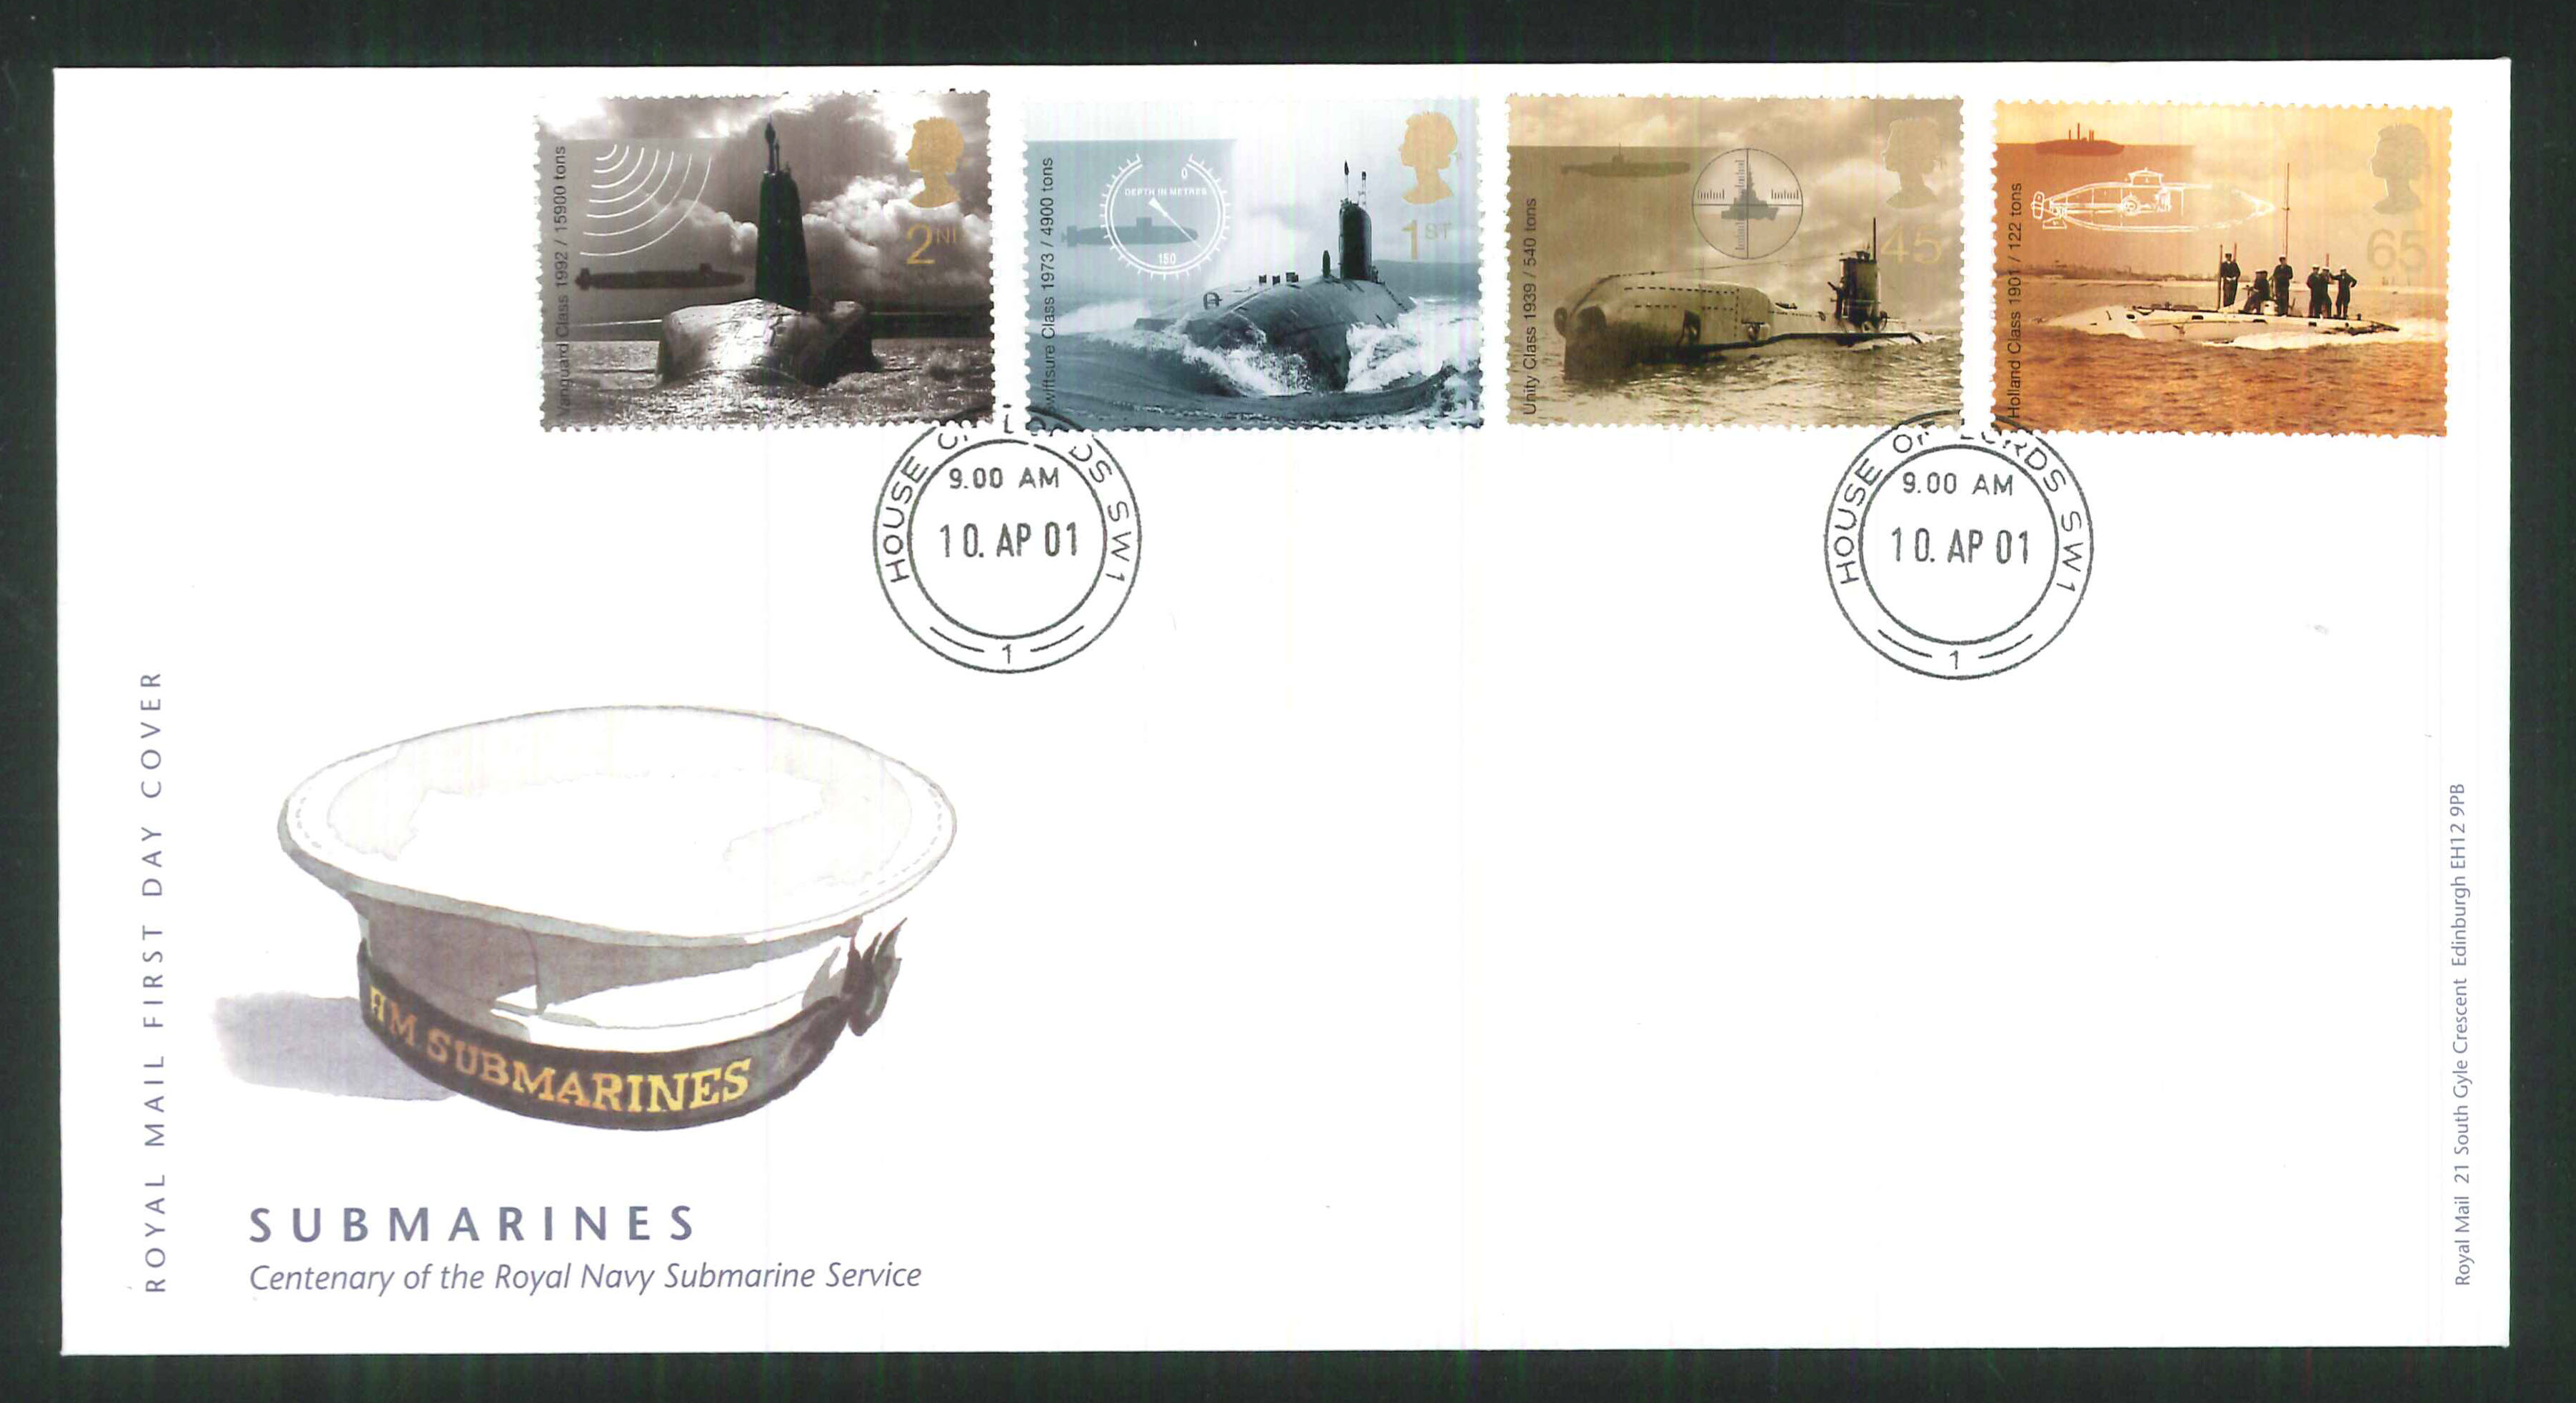 2001 - Submarines First Day Cover - House of Lords CDS Postmark